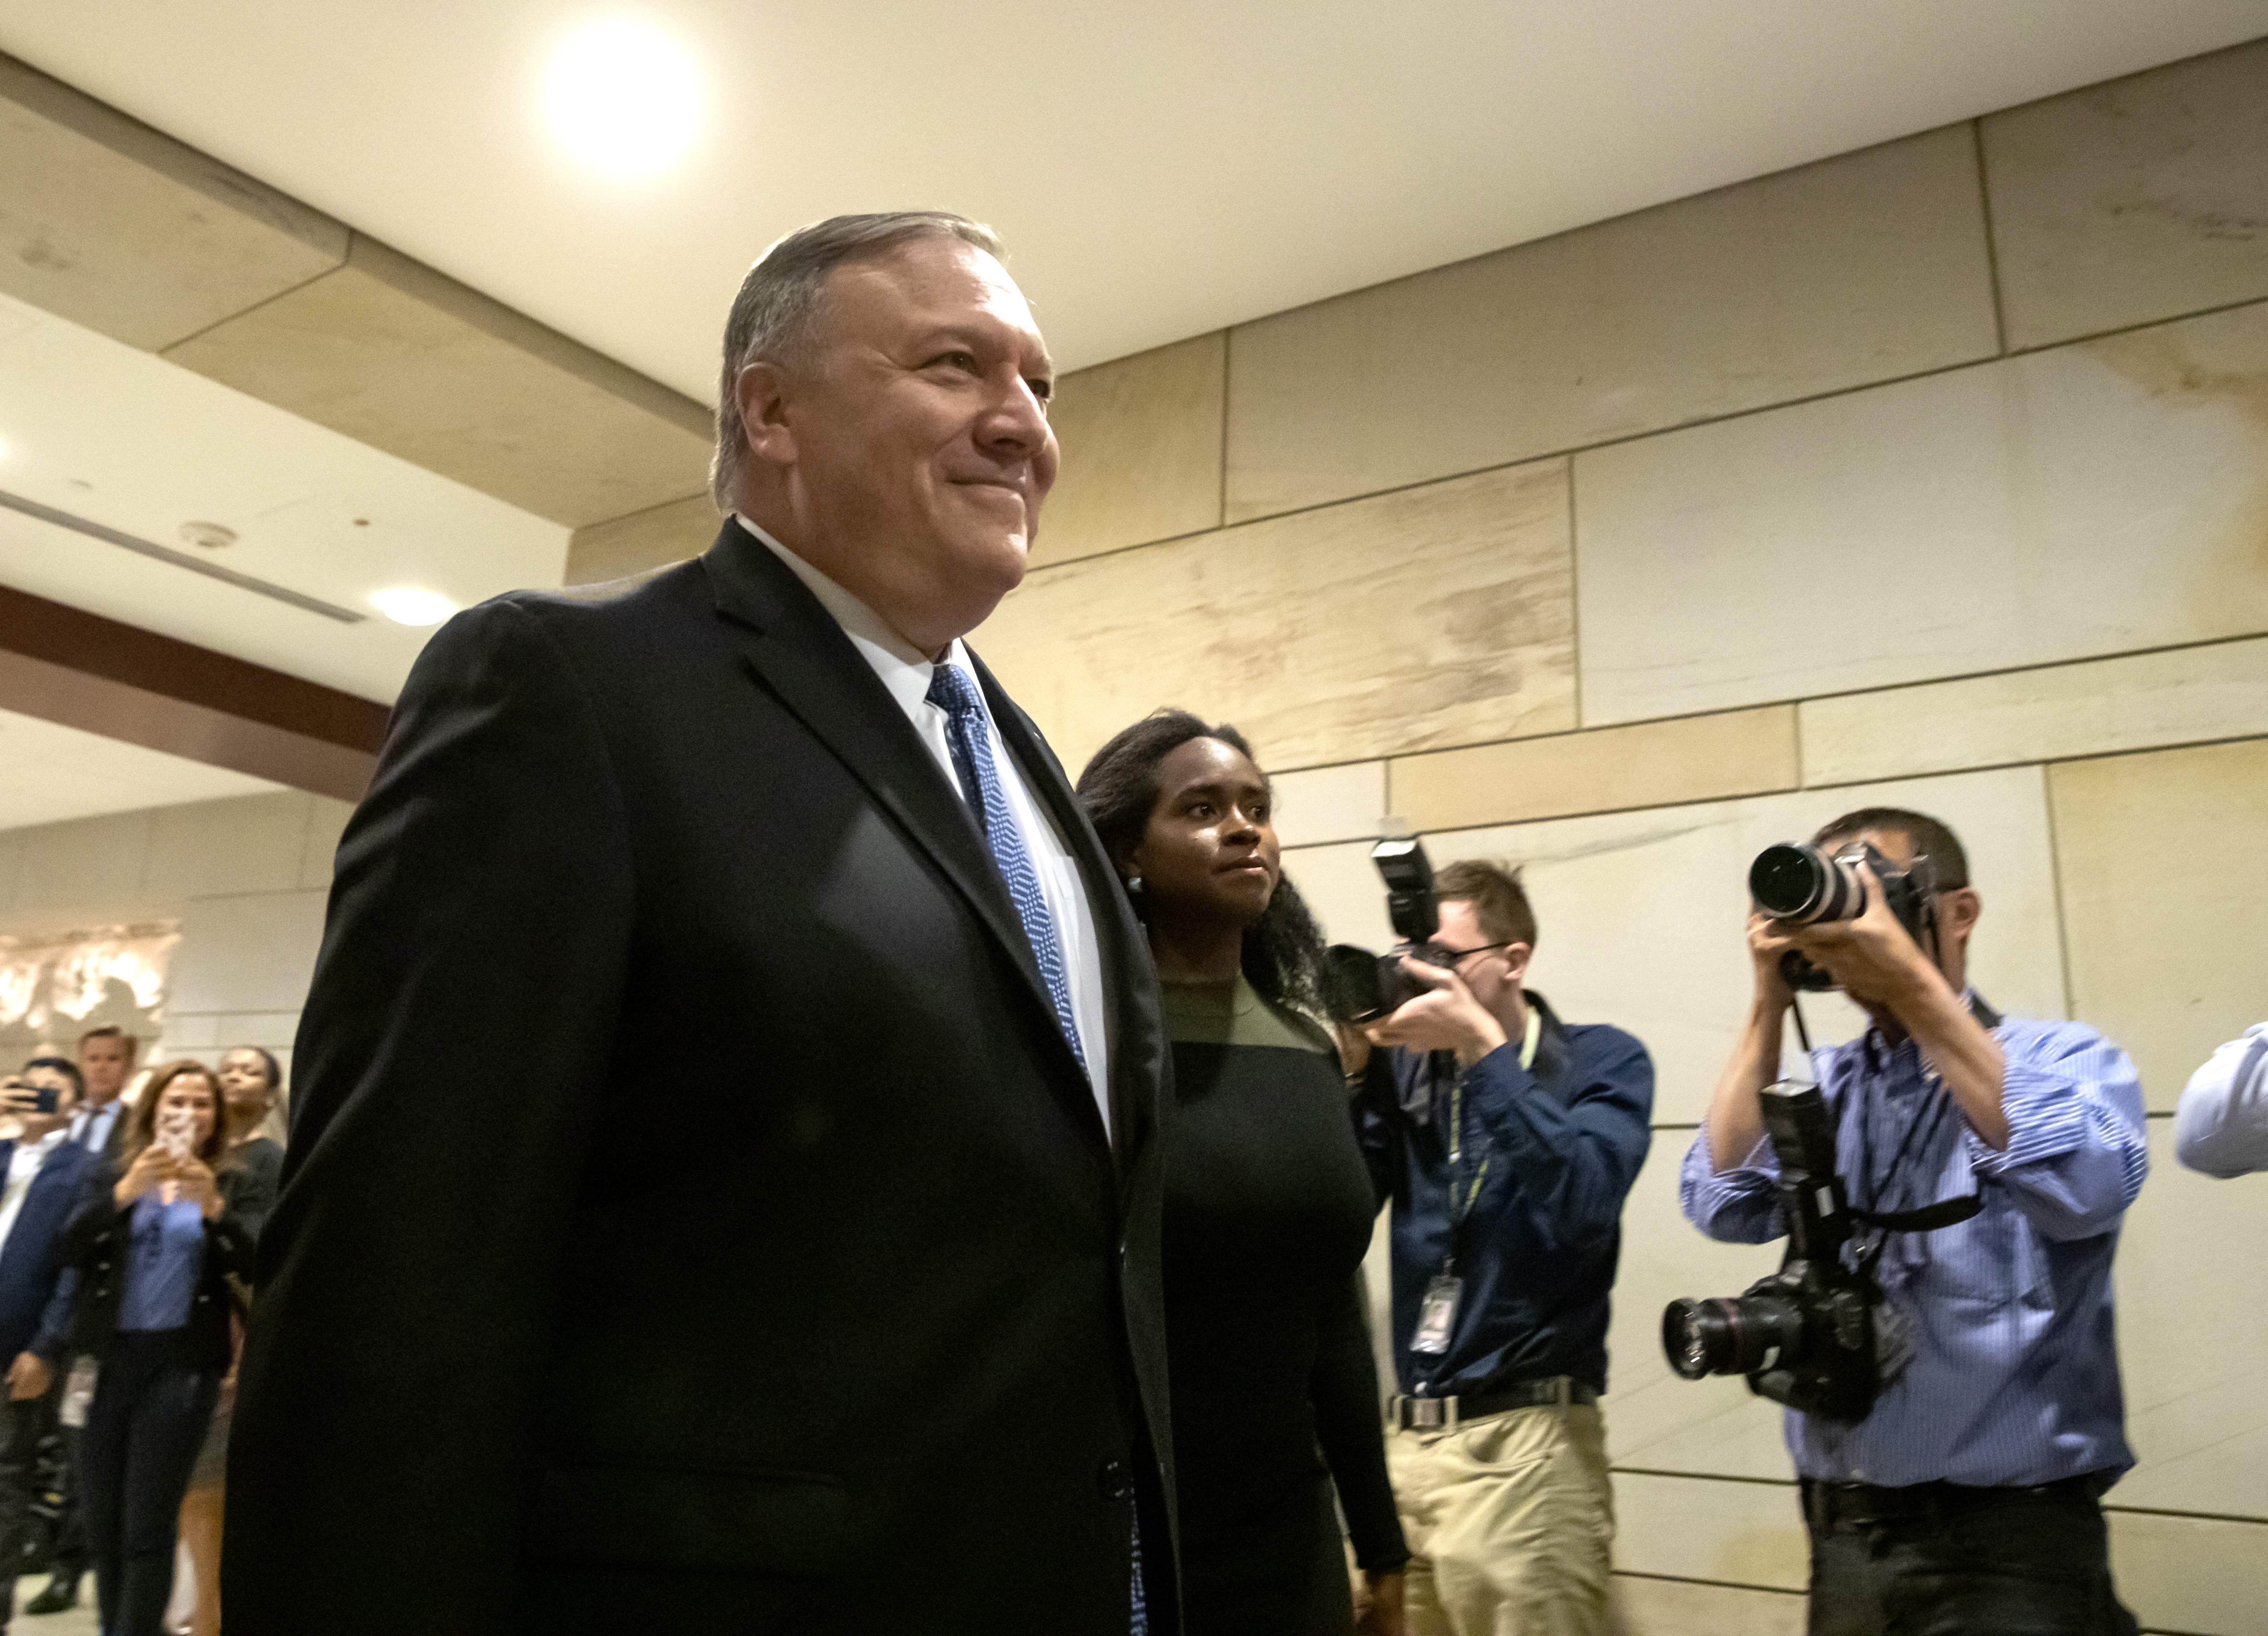 epa07590057 US Secretary of State Mike Pompeo arrives to give a classified intelligence briefing on Iran to members of the House of Representatives at the Capitol in Washington, DC, USA, 21 May 2019. The administration of President Trump is briefing Congress on intelligence that has prompted the US military build up against reported Iranian threats in the Persian Gulf region.  EPA/ERIK S. LESSER